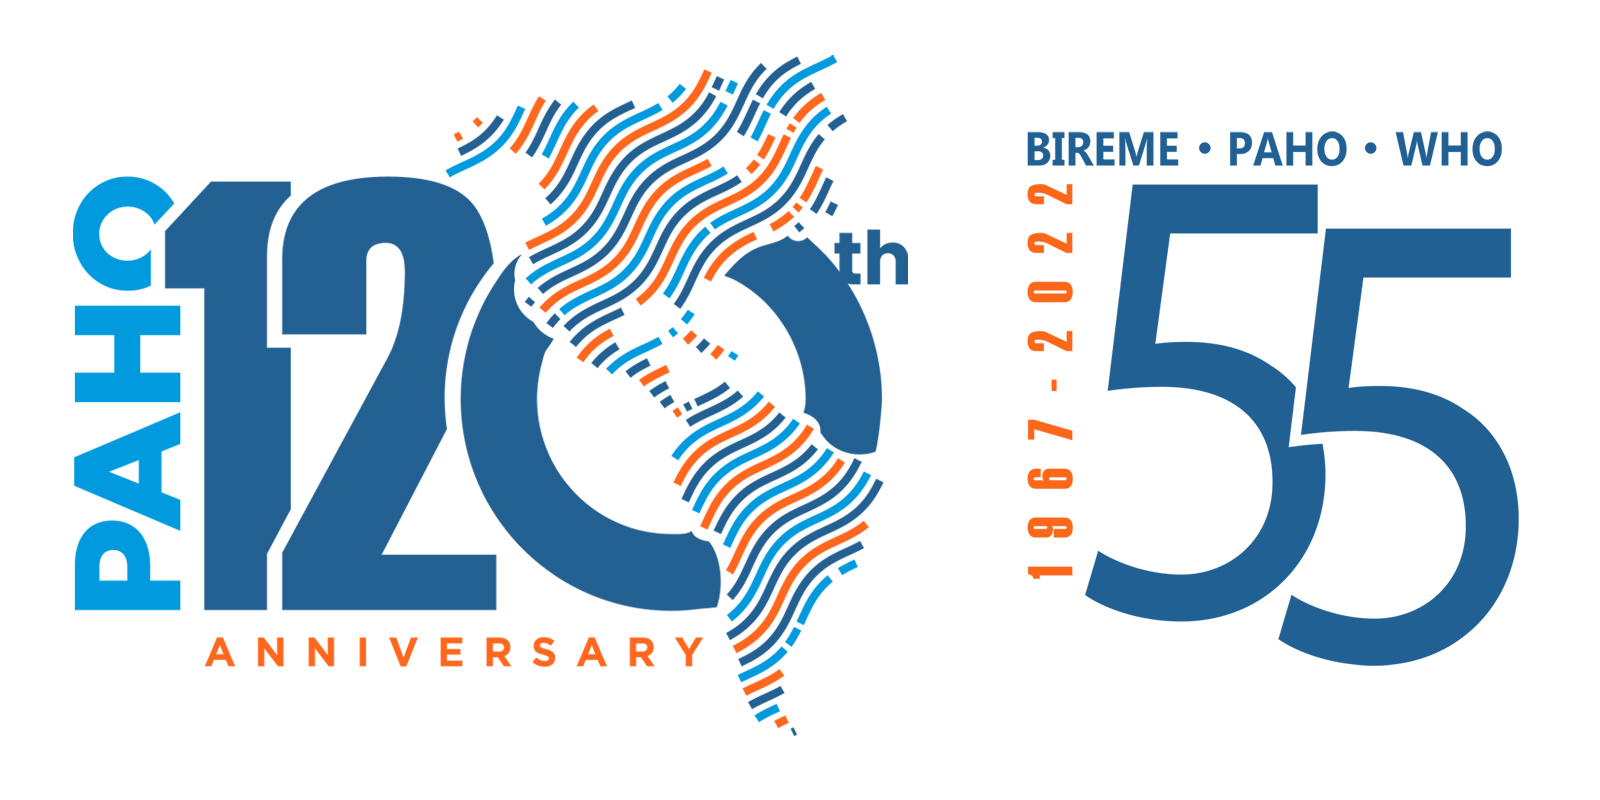 bireme-in-the-first-semester-of-2022-main-results